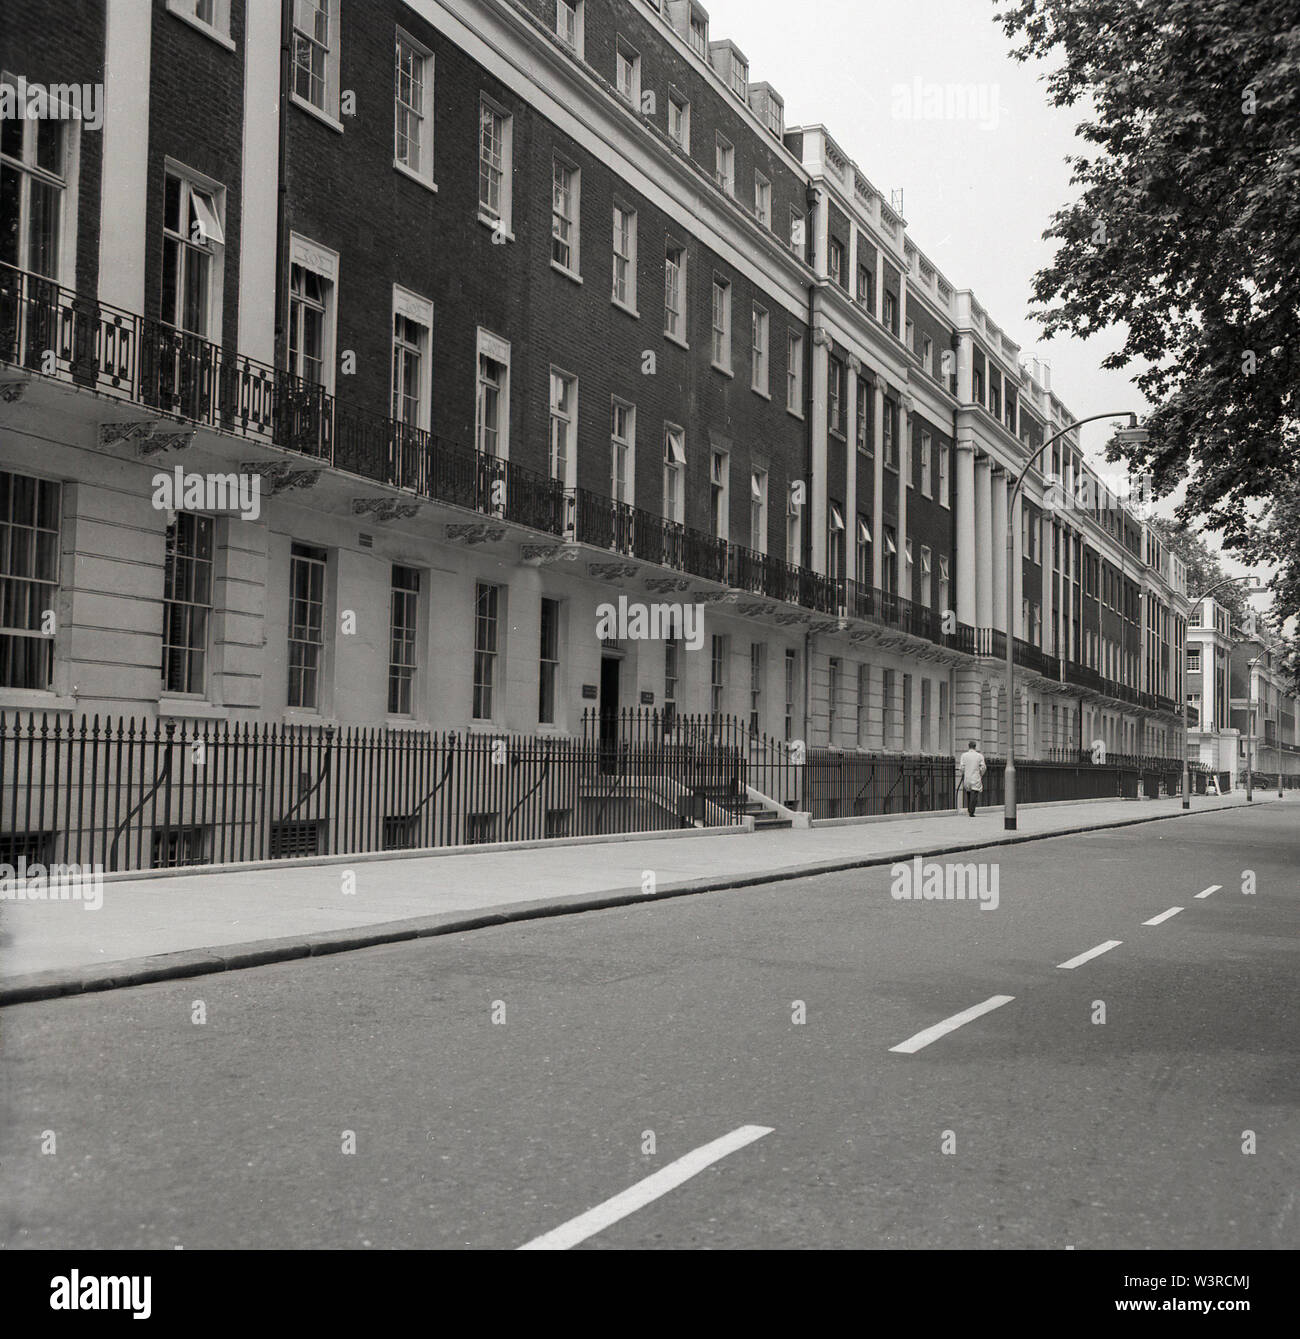 1960, historical, a view of the houses in Gordon Square, Bloomsbury, London, England, an elegant terrace of tall, six-storey Georgian houses in the Bedford Estate. Built by Thomas Cubitt between 1820-1850 for the Duke of Bedford and named after his second wife. The famous economist John Maynard Keynes lived at No 46, and before that writer Viginia Woolf. Stock Photo